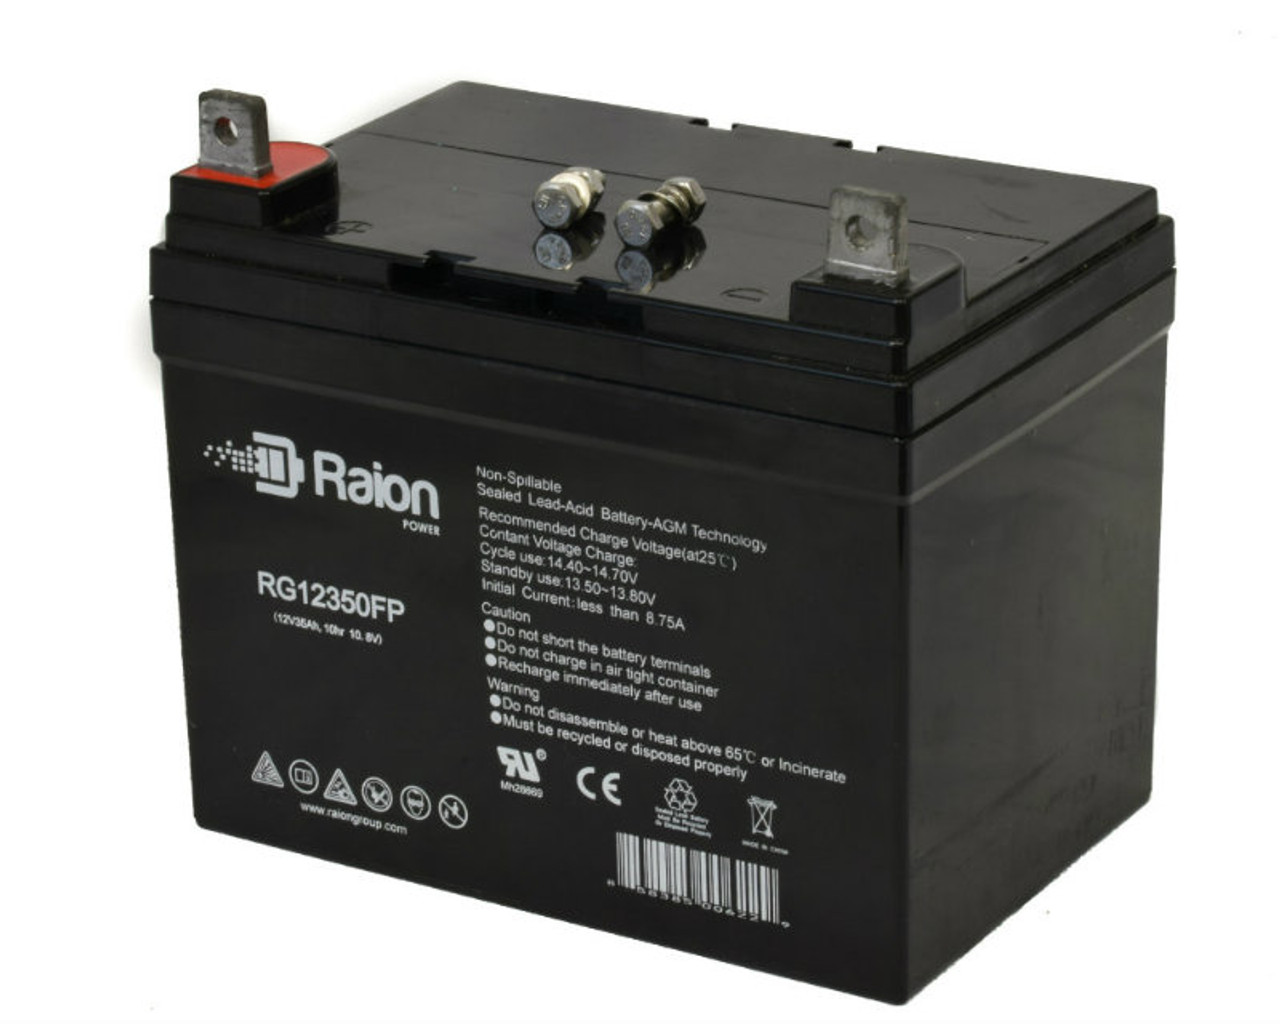 Raion Power Replacement 12V 35Ah RG12350FP Battery for Scotts (By Murray) S1742